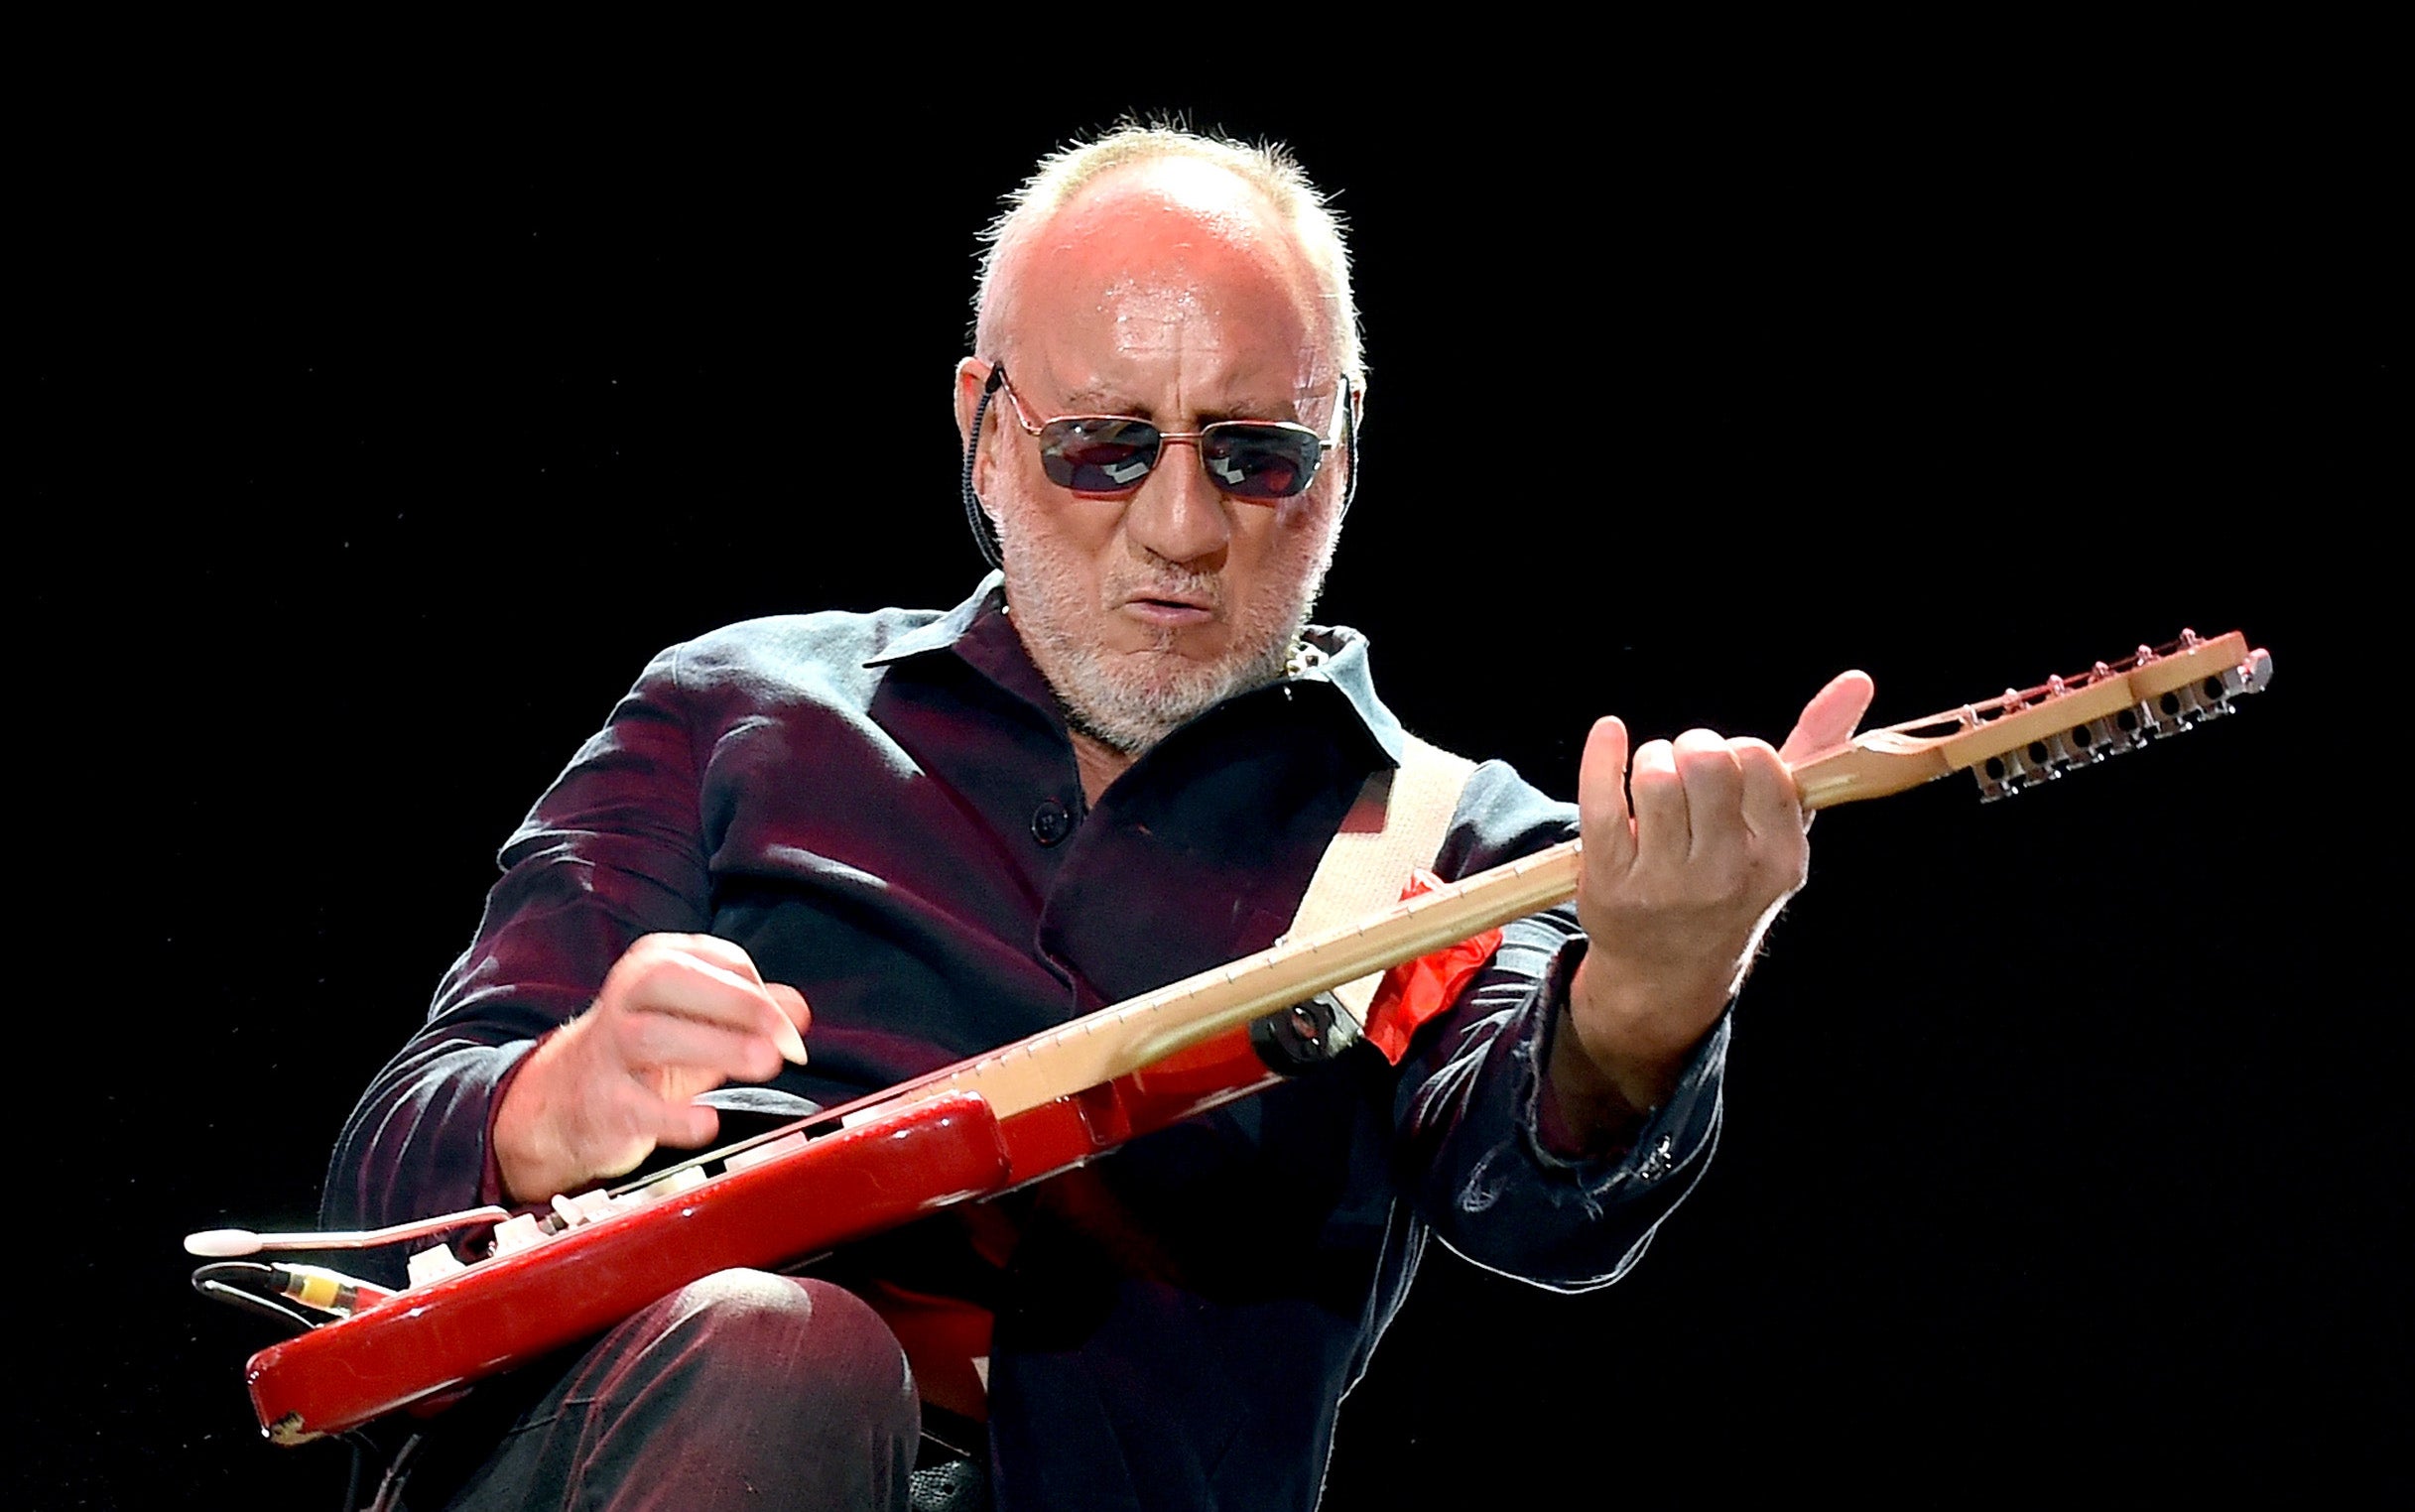 Guitarist Pete Townshend Fresh Air Archive Interviews with Terry Gross